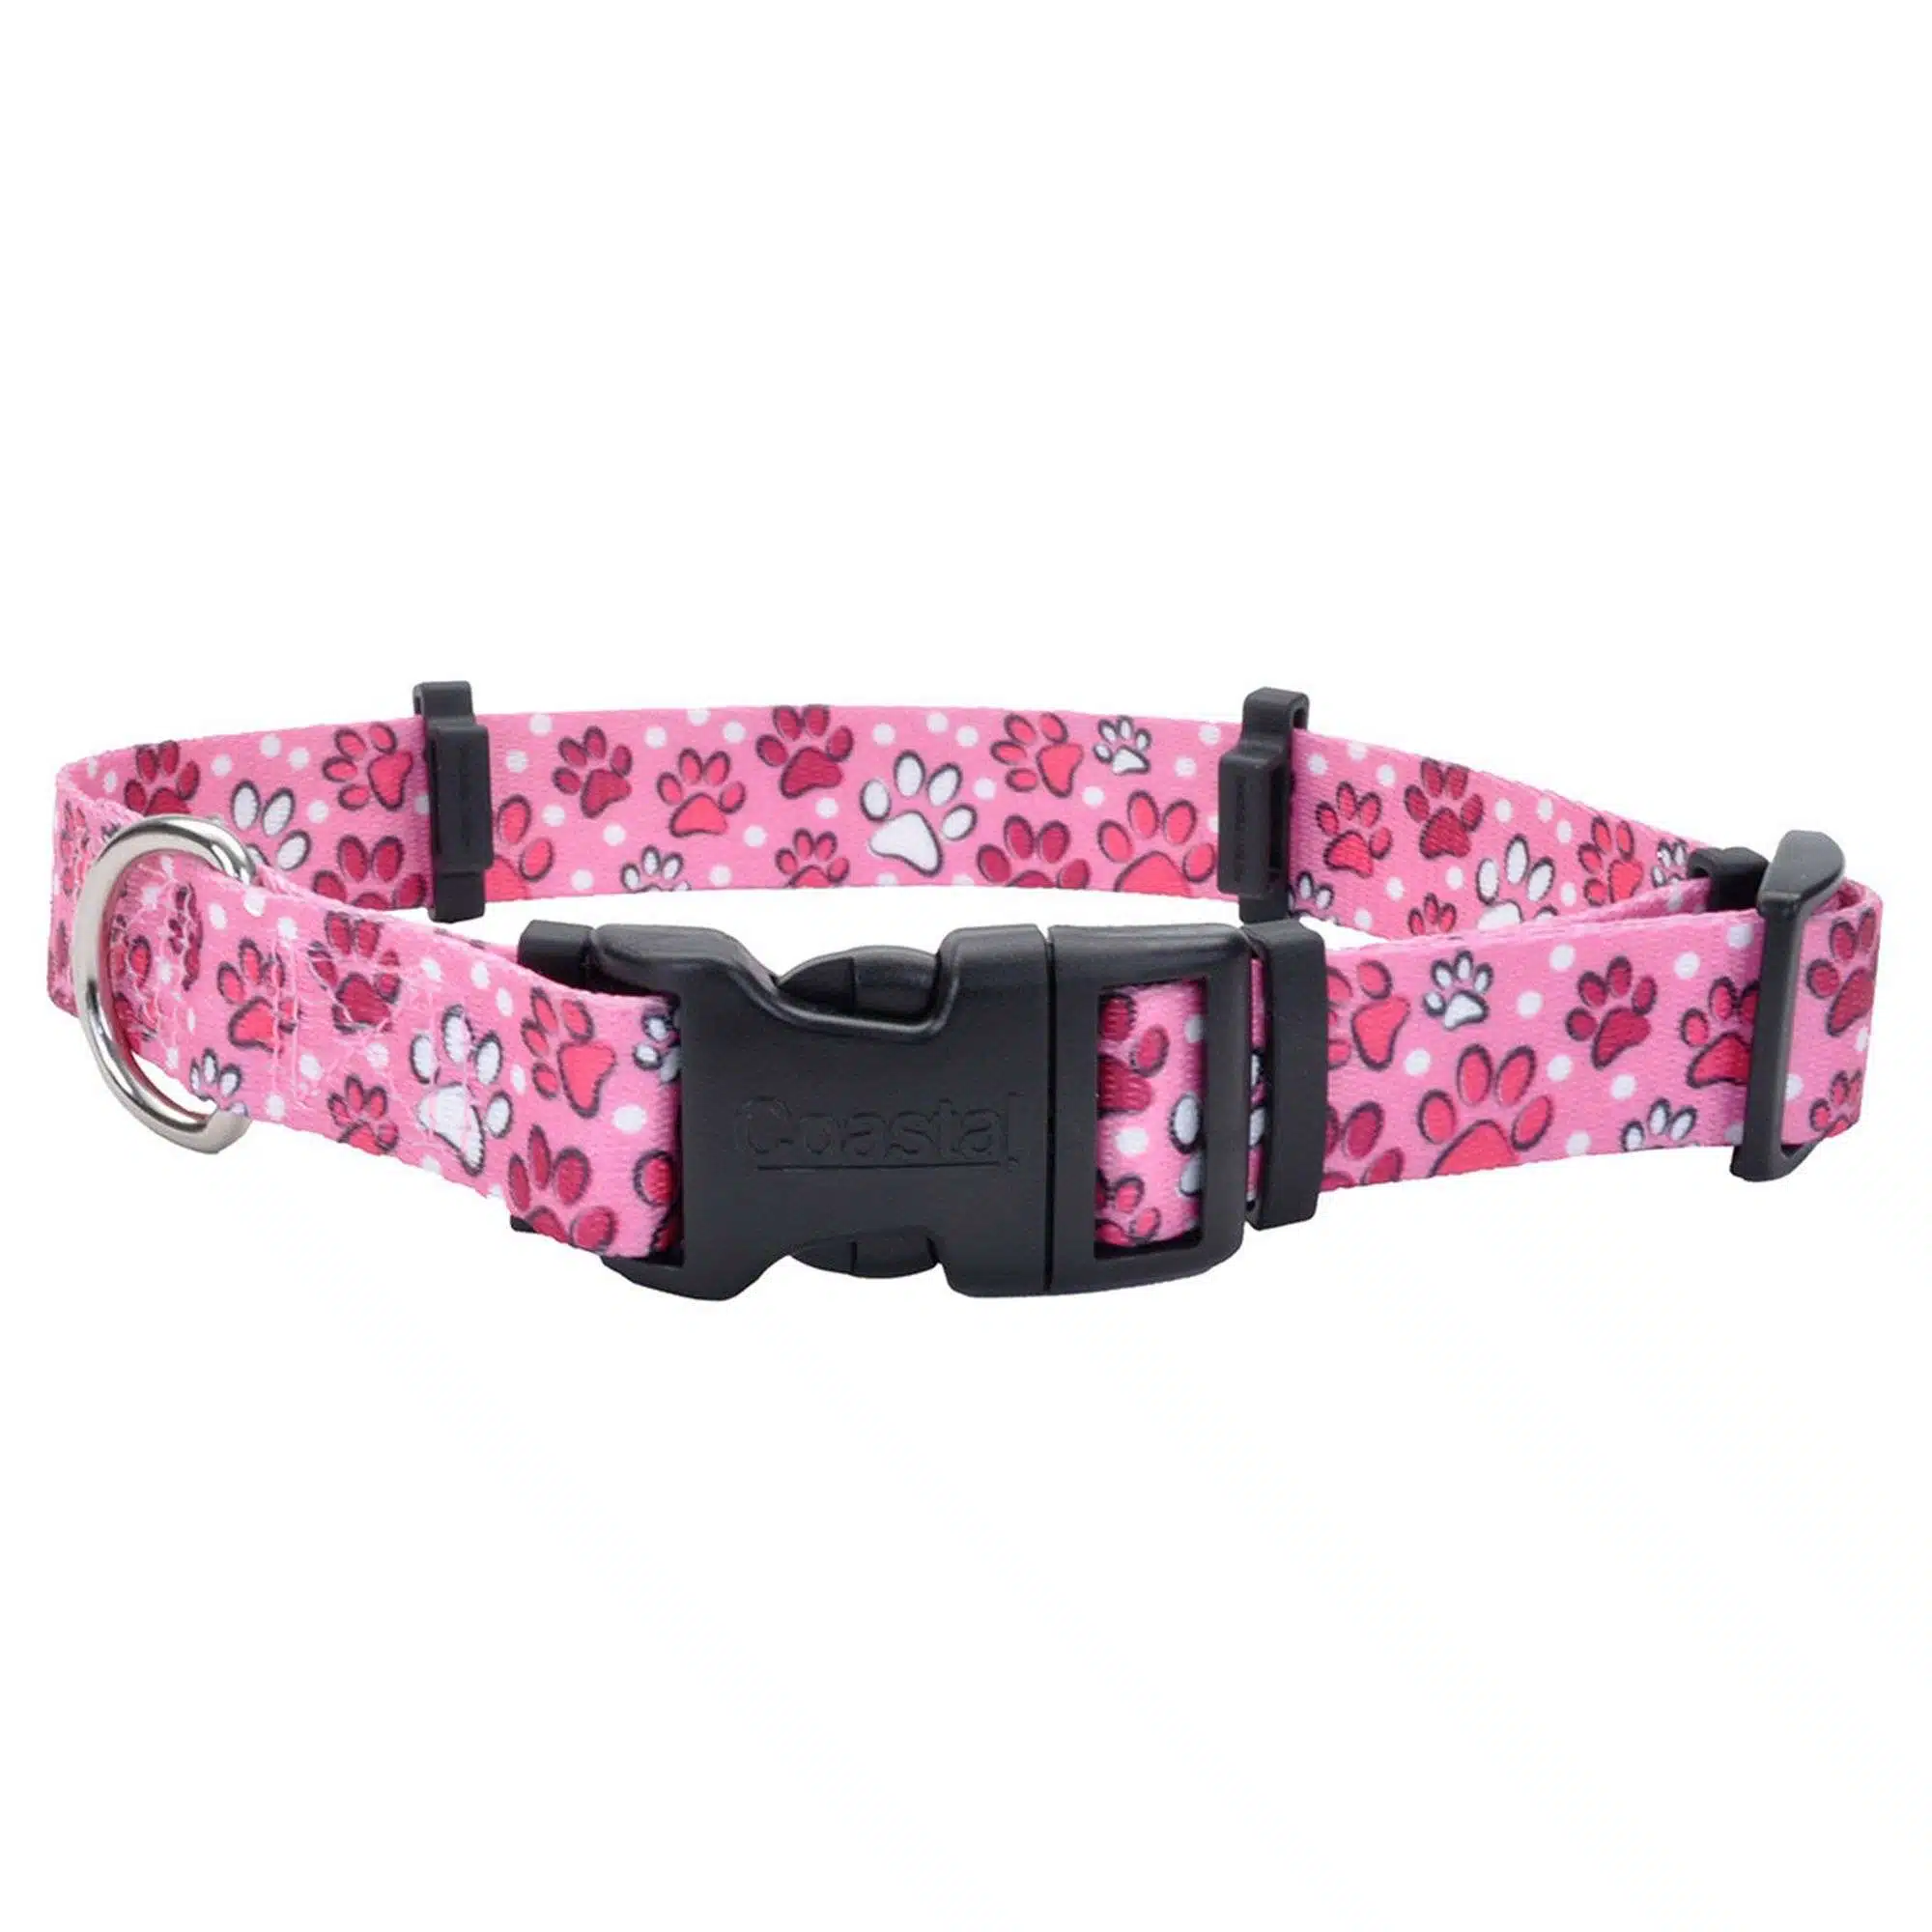 Coastal Pet Products Personalized Secure Away Adjustable Flea and Tick Collar Protector in Pink Paws, Size: 18"L x 1"W | PetSmart